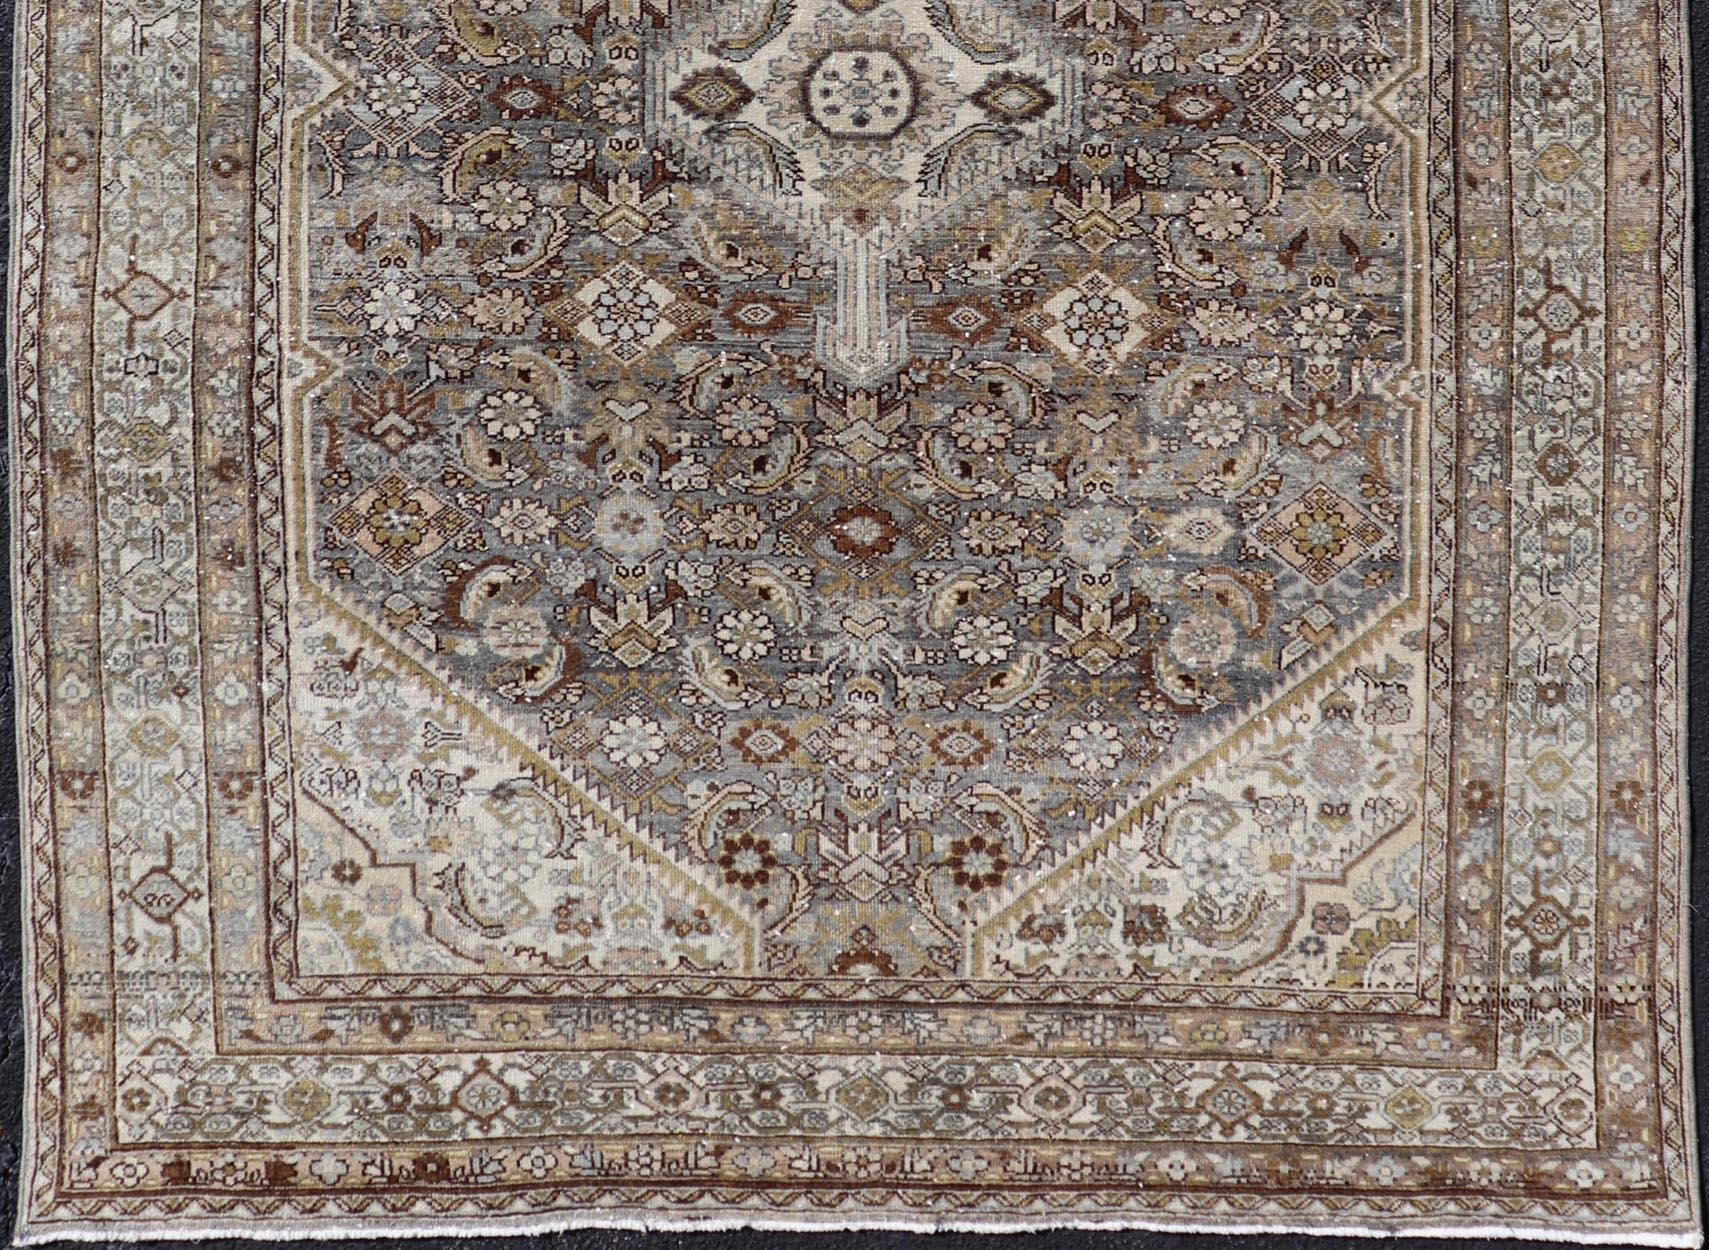 Antique Persian Bibikabad Carpet with Steal Blue, Charcoal, Green, and Brown  For Sale 2